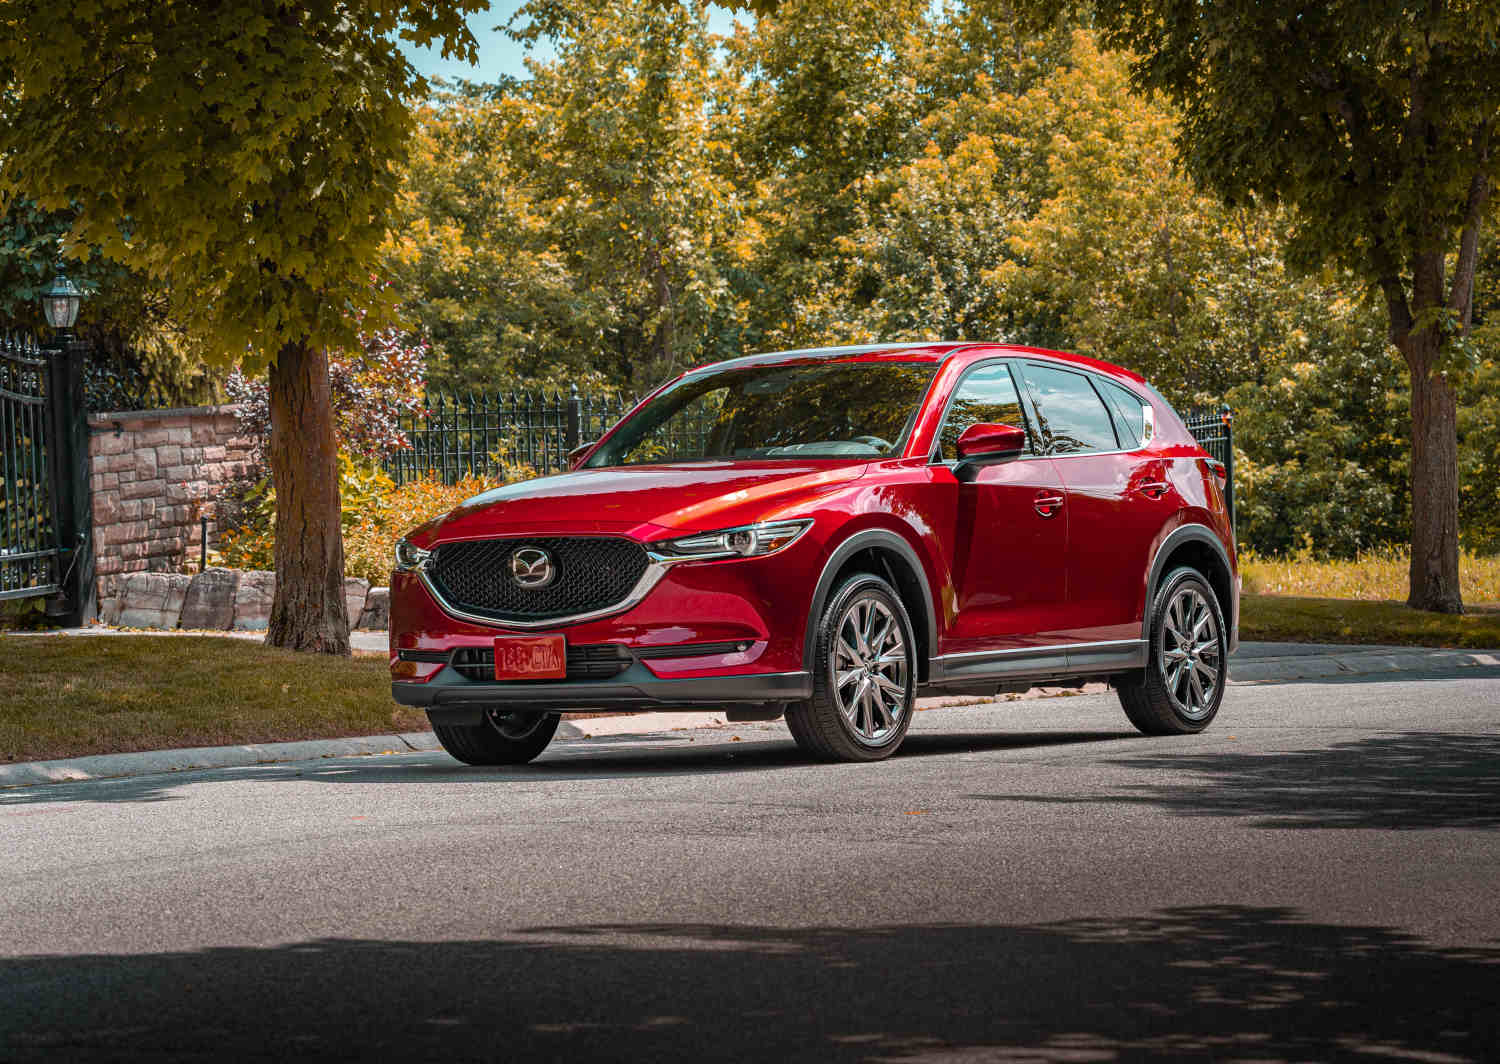 The best SUVs of 2020 include this Mazda CX-5